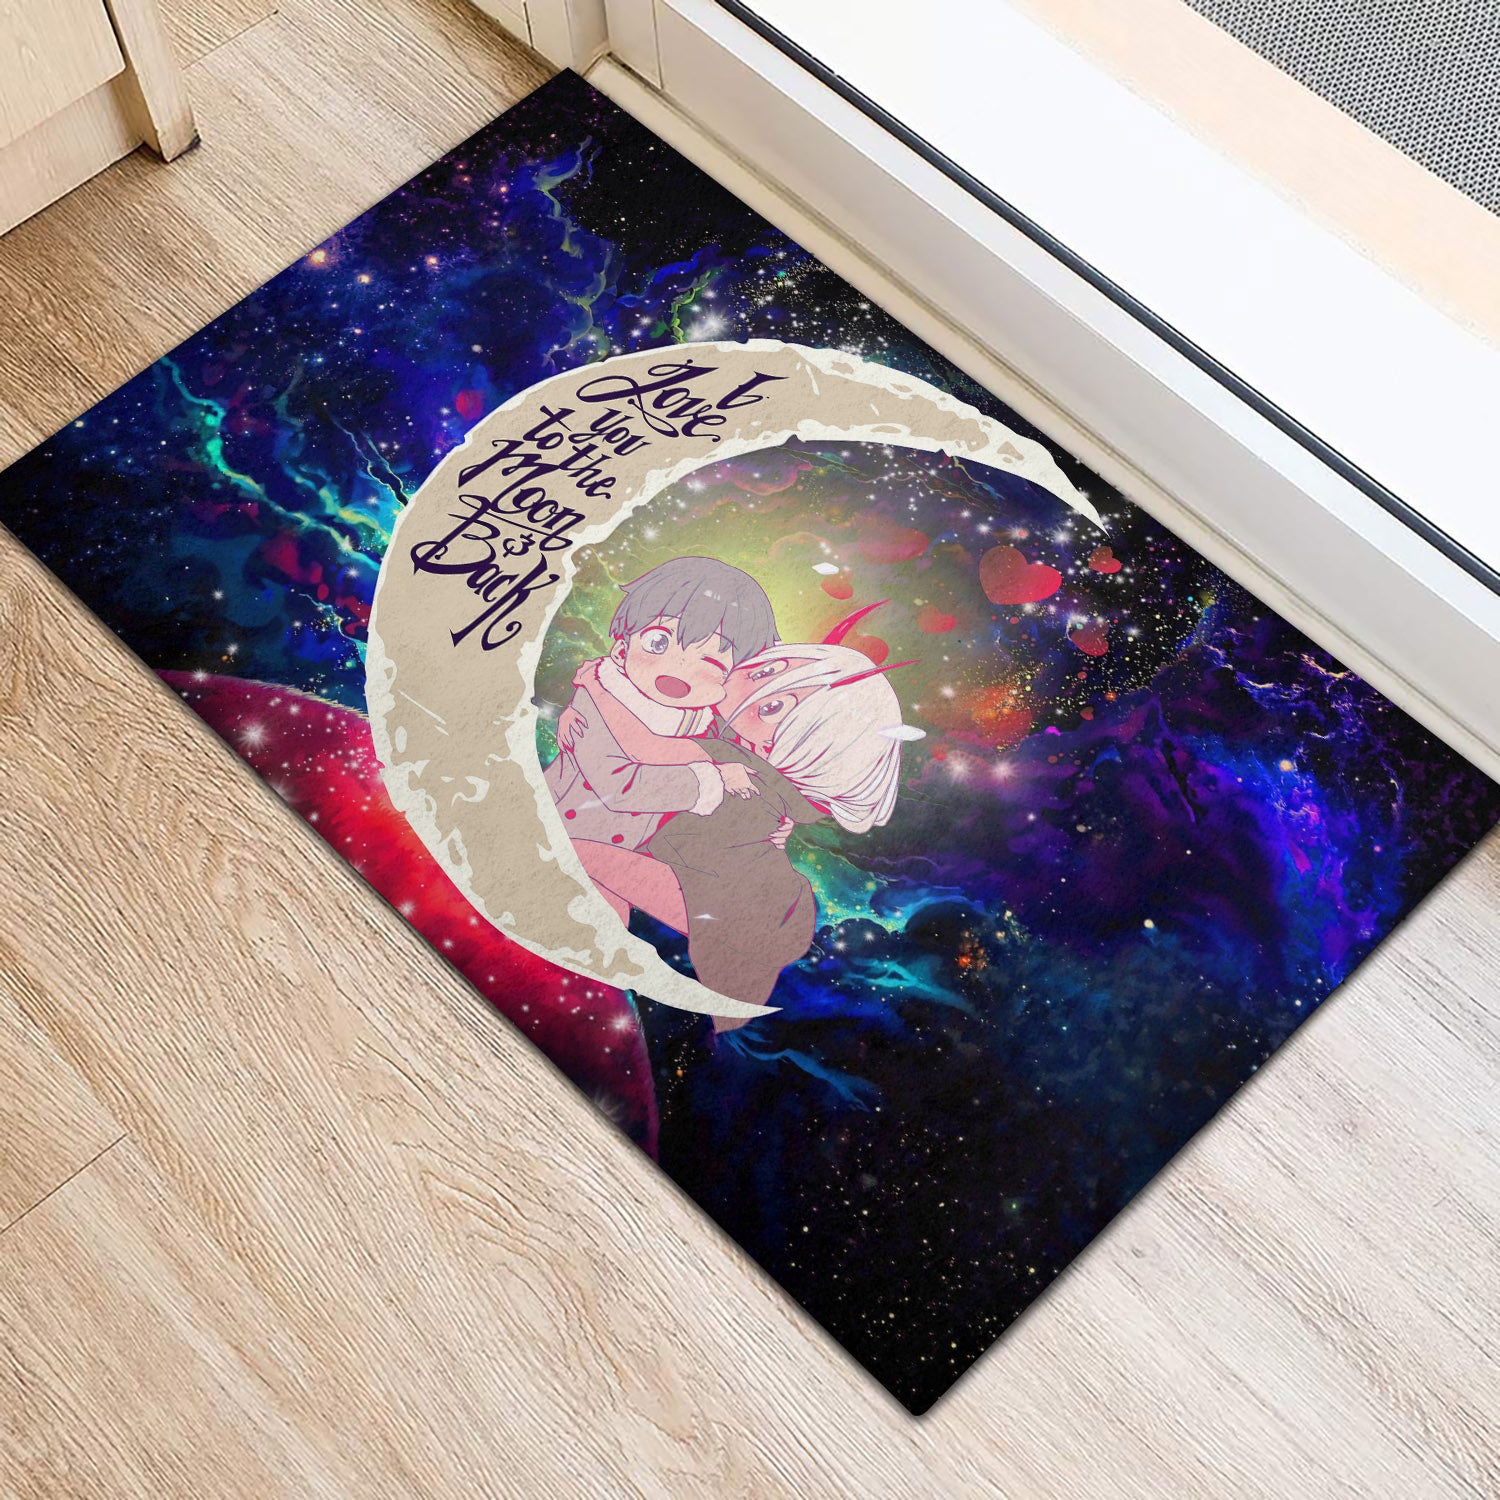 Darling In The Franxx Hiro And Zero Two Love You To The Moon Galaxy Back Door Mats Home Decor